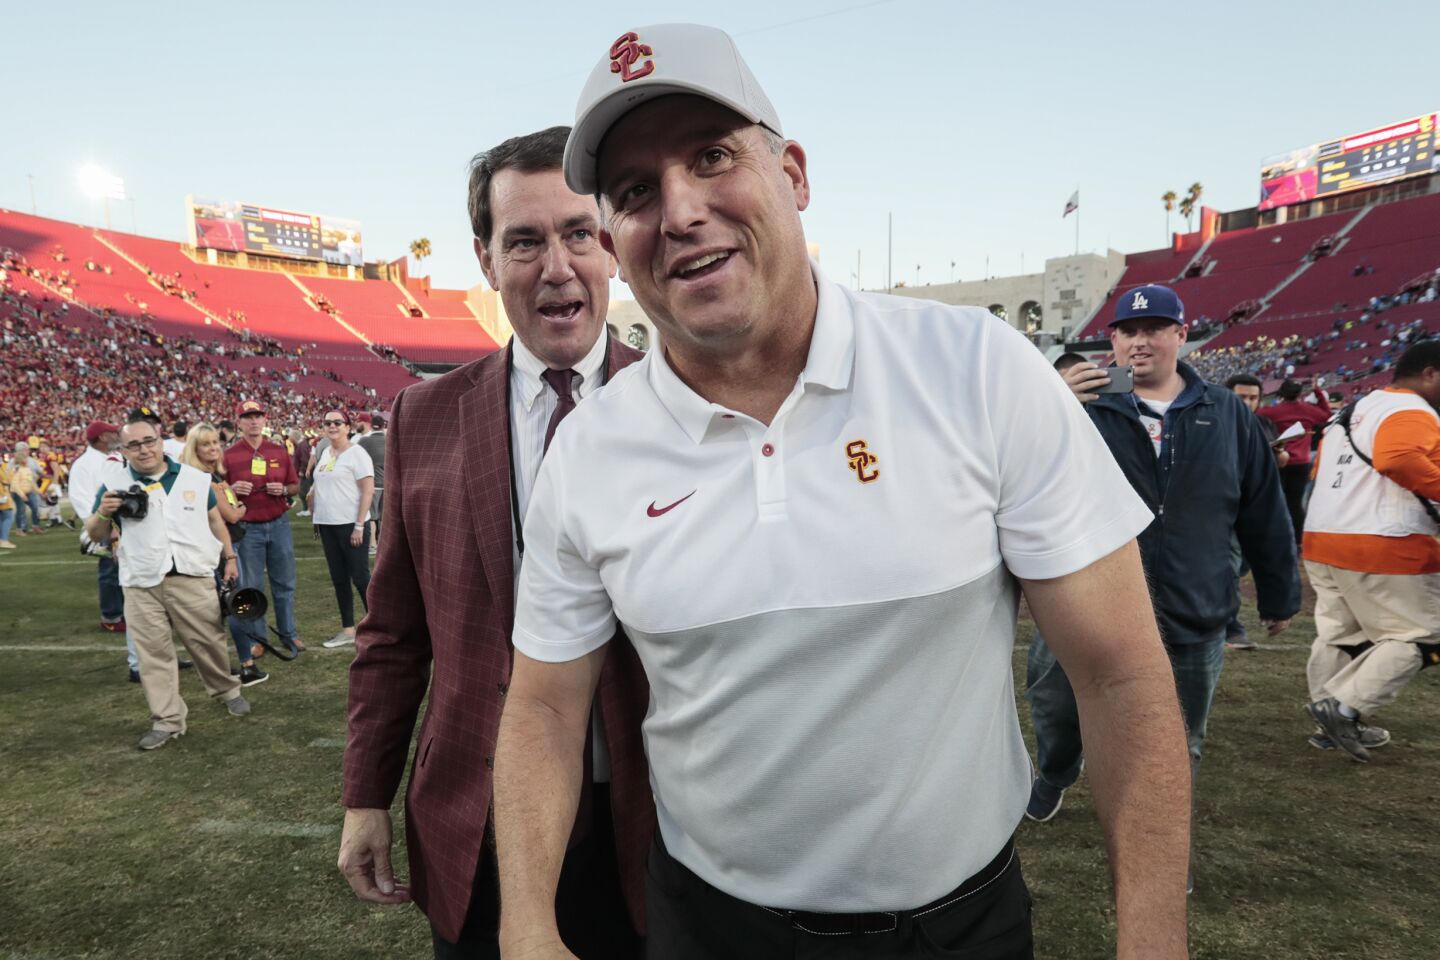 USC head coach Clay Helton and Athletic Director Mike Bohn share a laugh together at midfield after a 52-35 win over UCLA at the Coliseum.